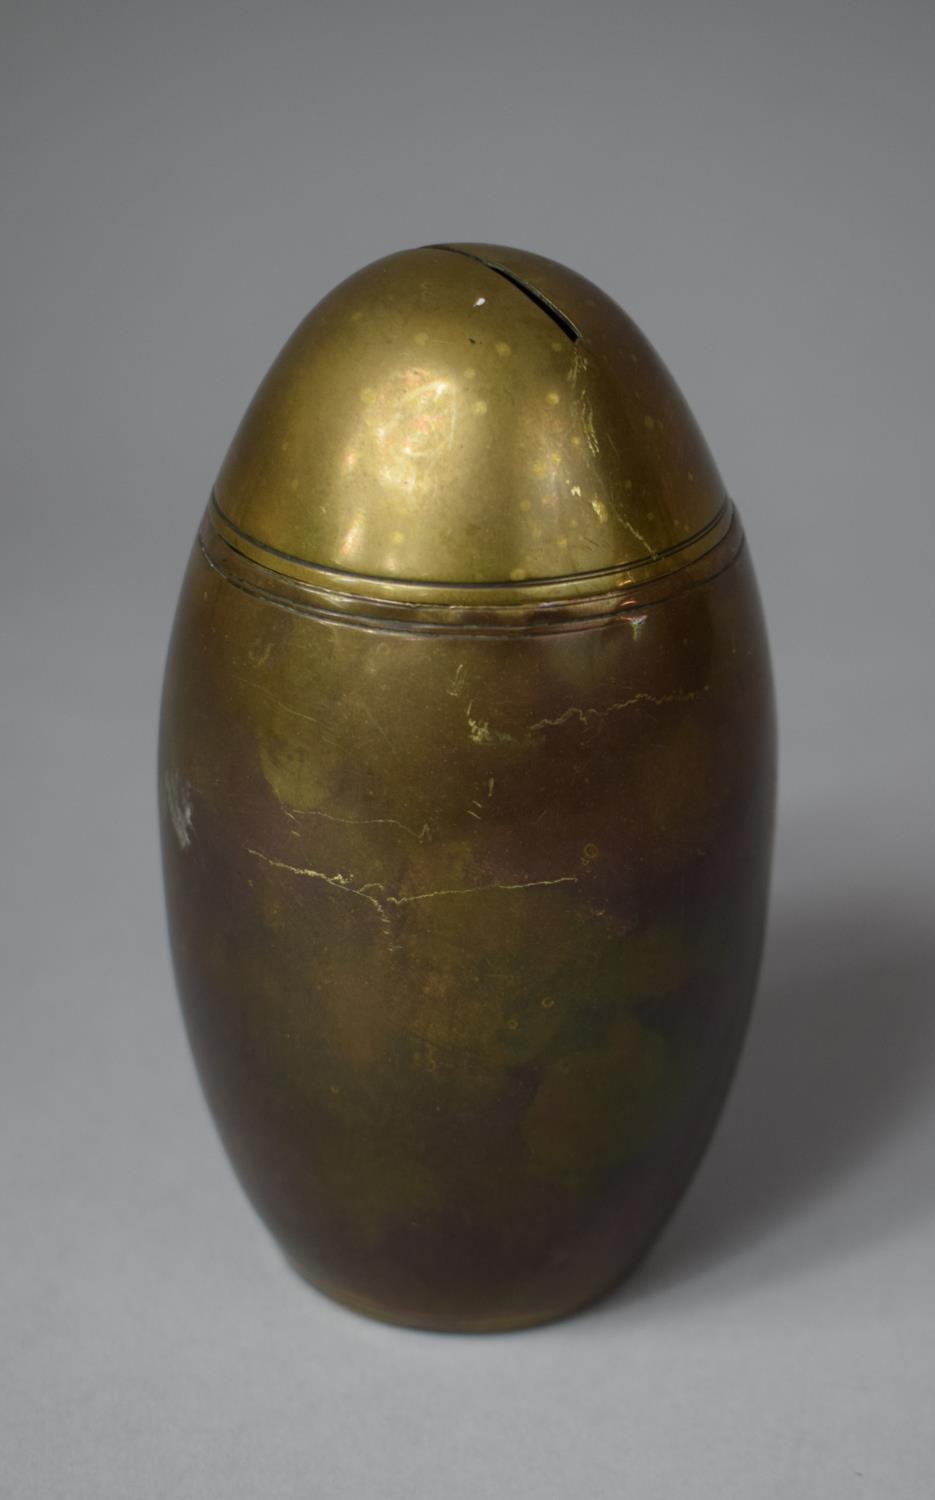 A Brass Trench Art Style Ovoid Money Box with Removable Lid, 14cm High - Image 2 of 3